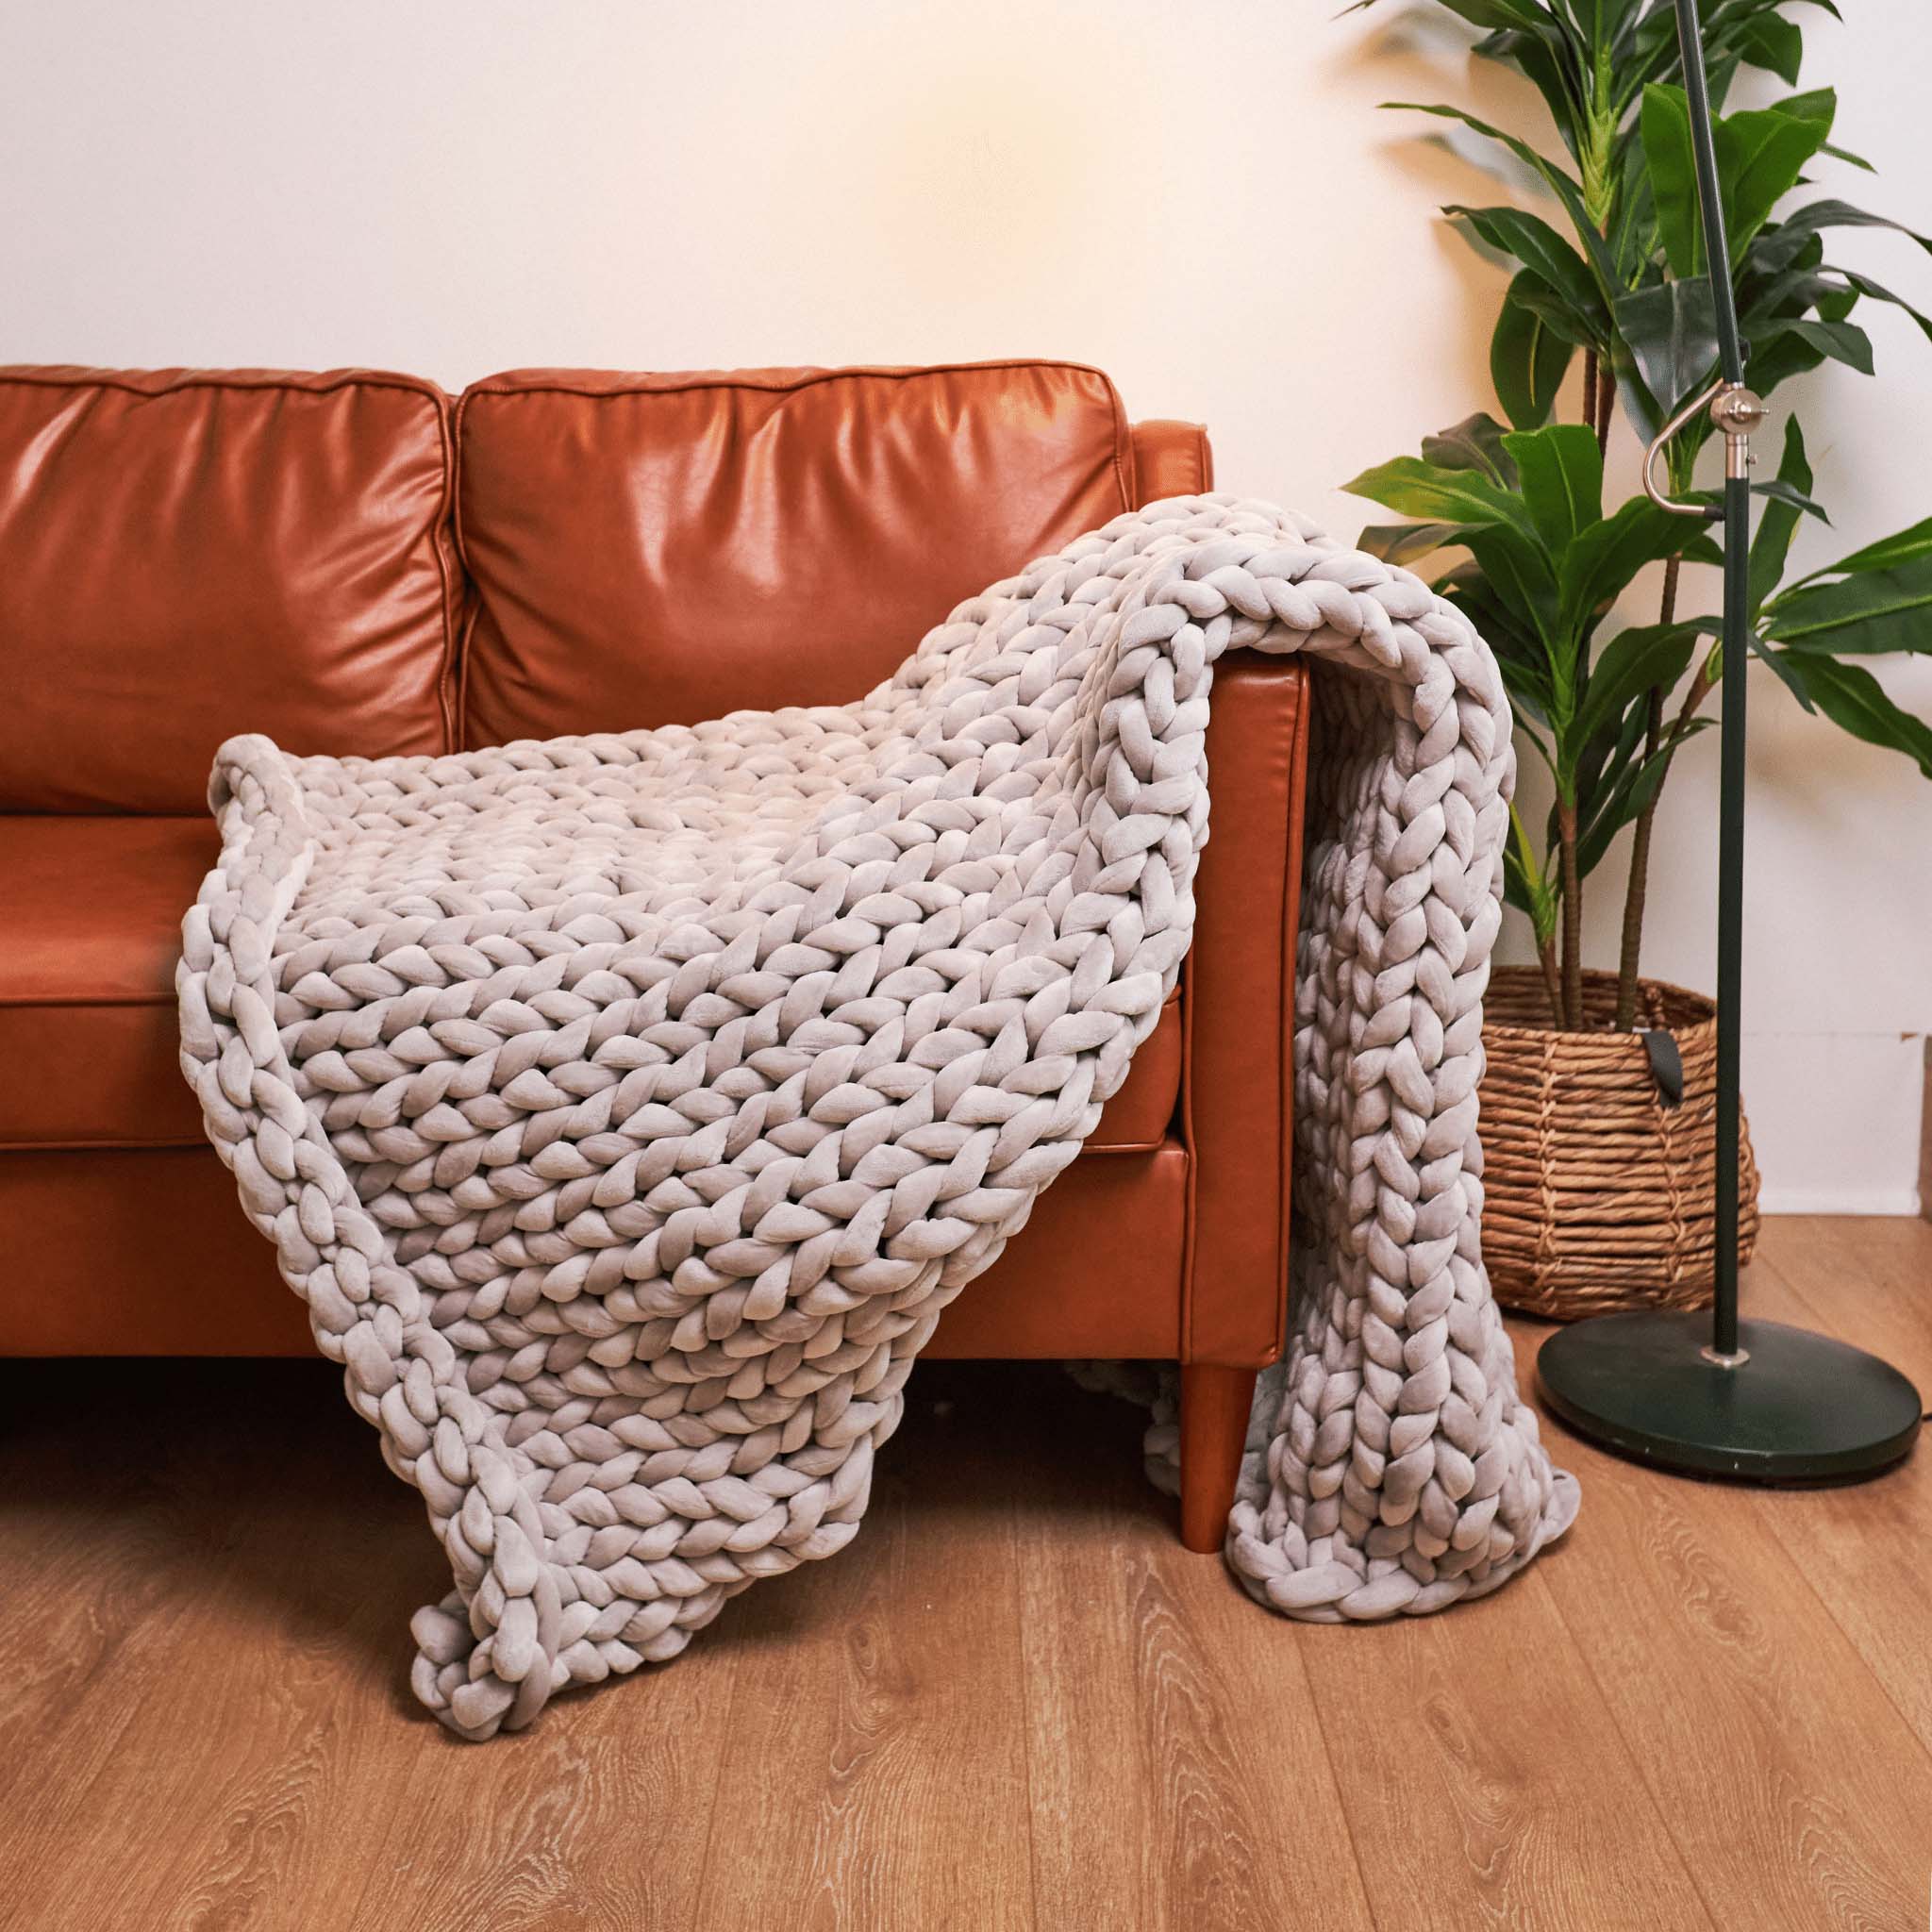 Hush  Hand Knitted Weighted Blanket – Hush Blankets